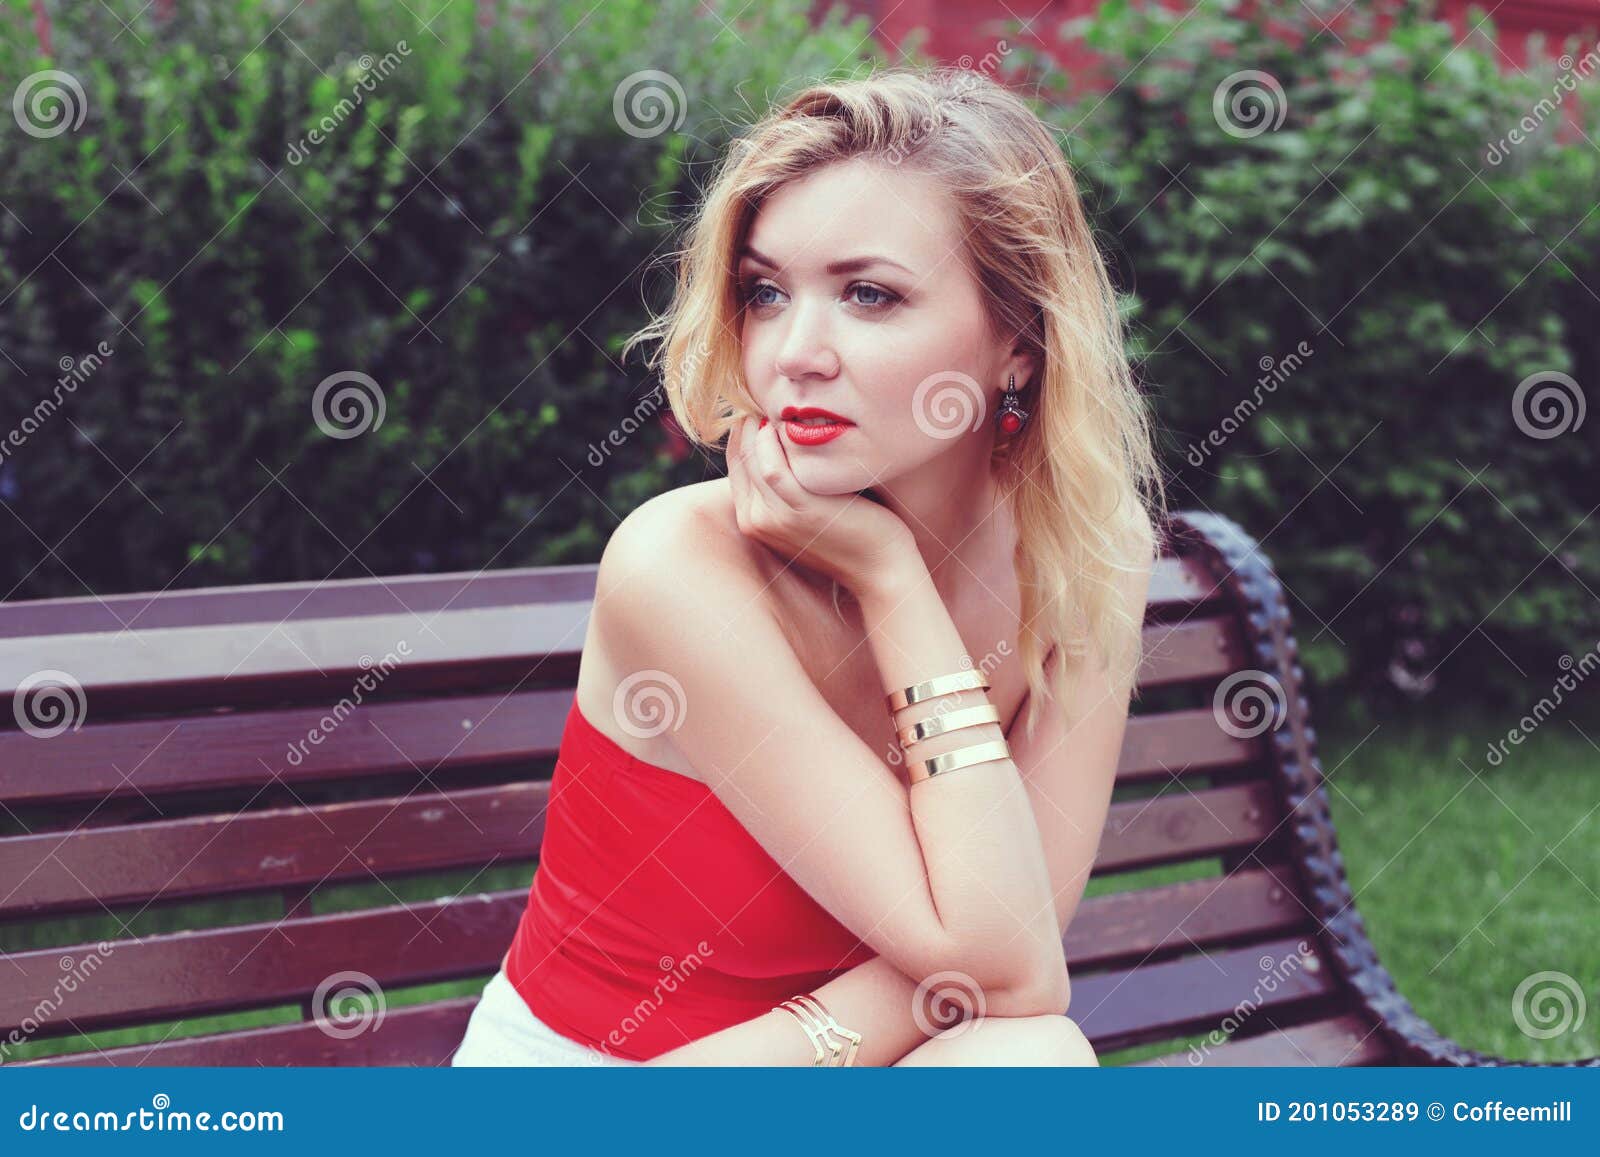 Young Beautiful Girl in a White Skirt Stock Image - Image of tone, good ...